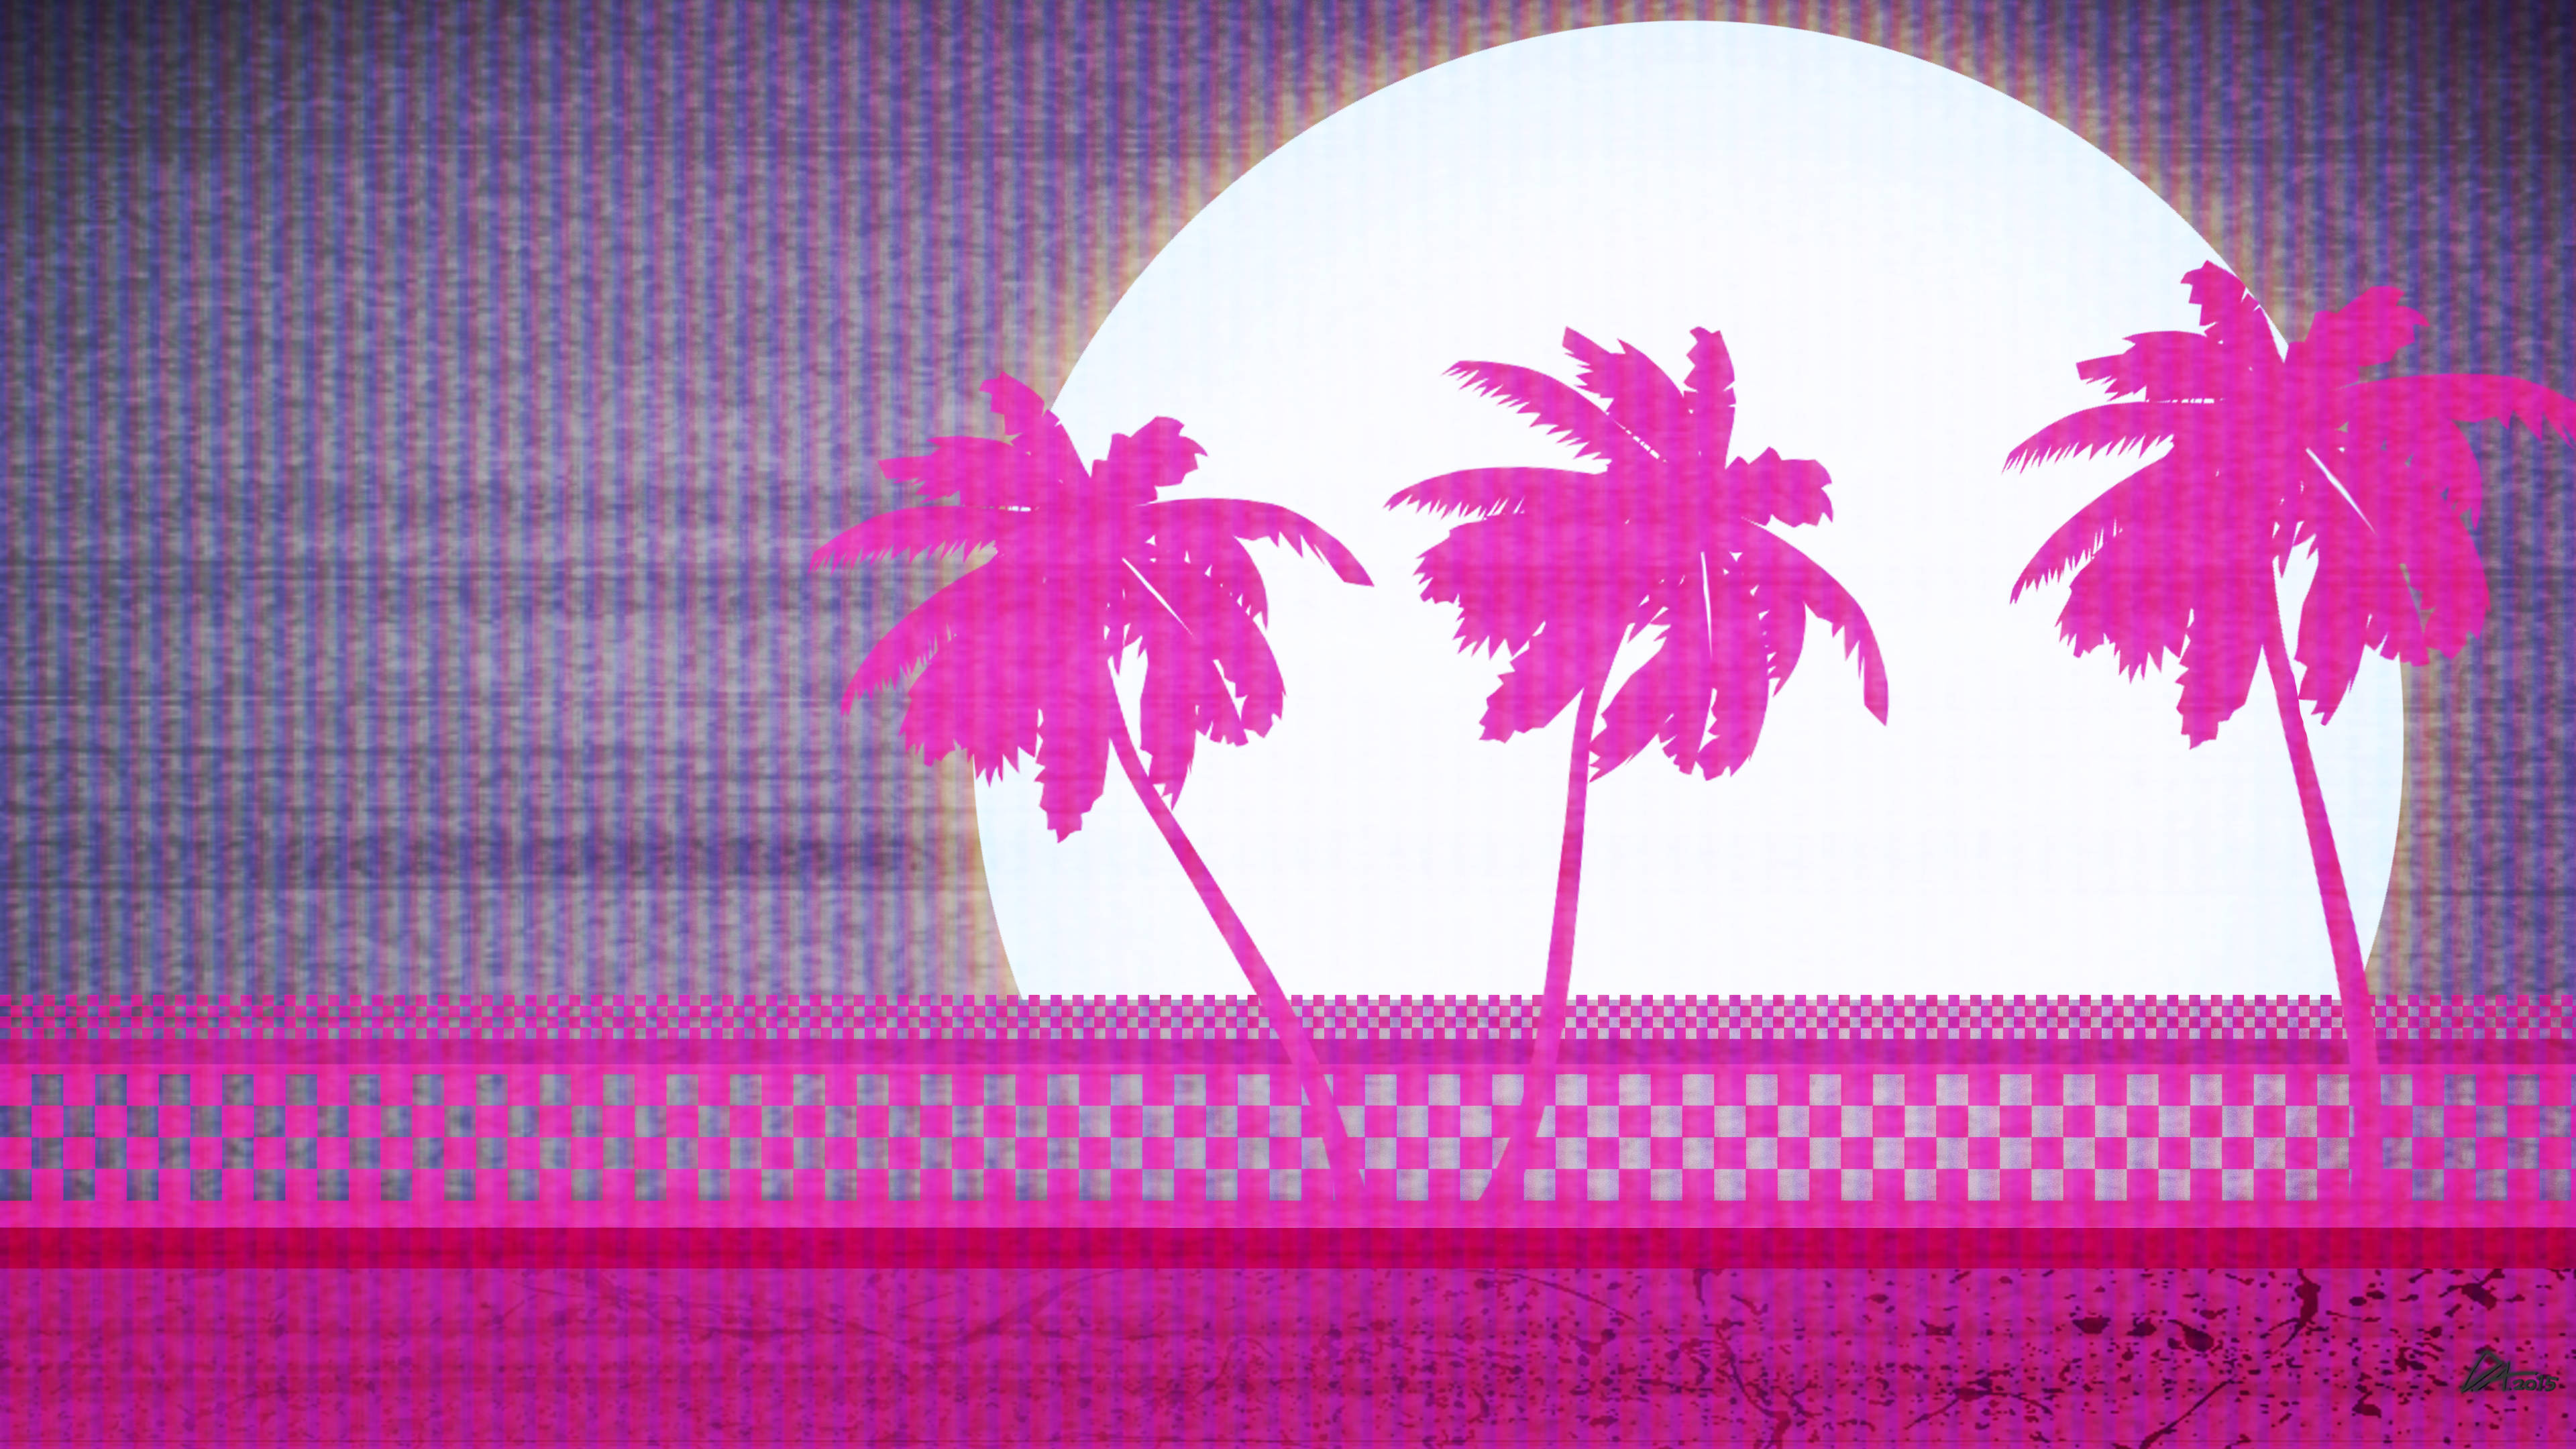 Miami Sunset Wallpapers